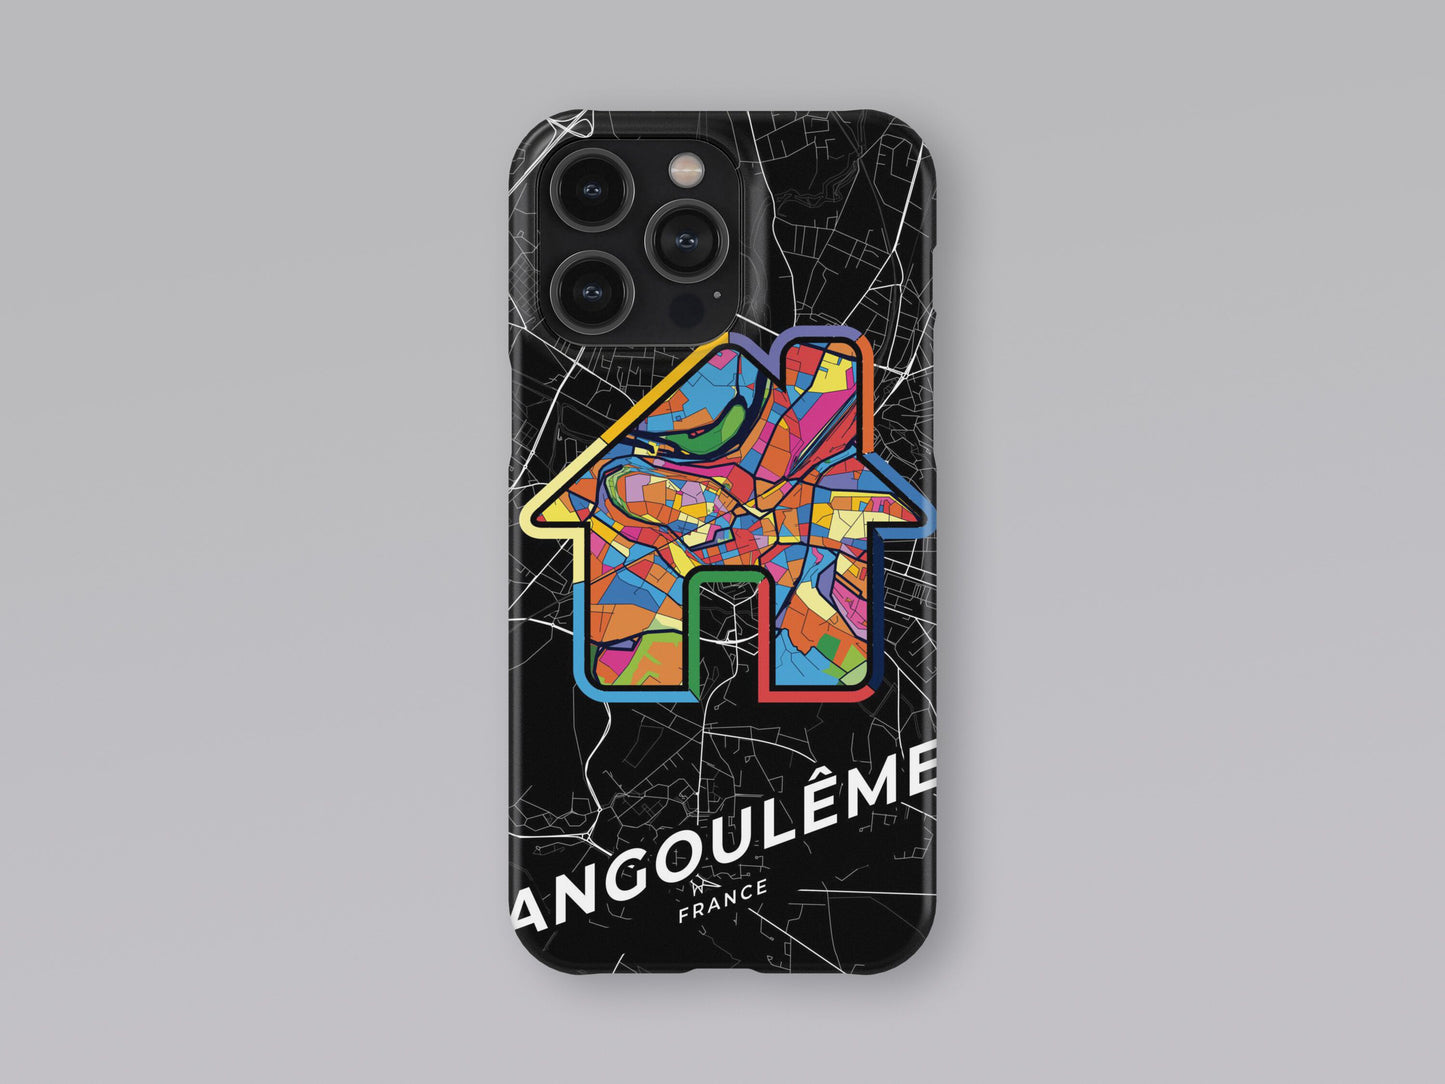 Angoulême France slim phone case with colorful icon. Birthday, wedding or housewarming gift. Couple match cases. 3